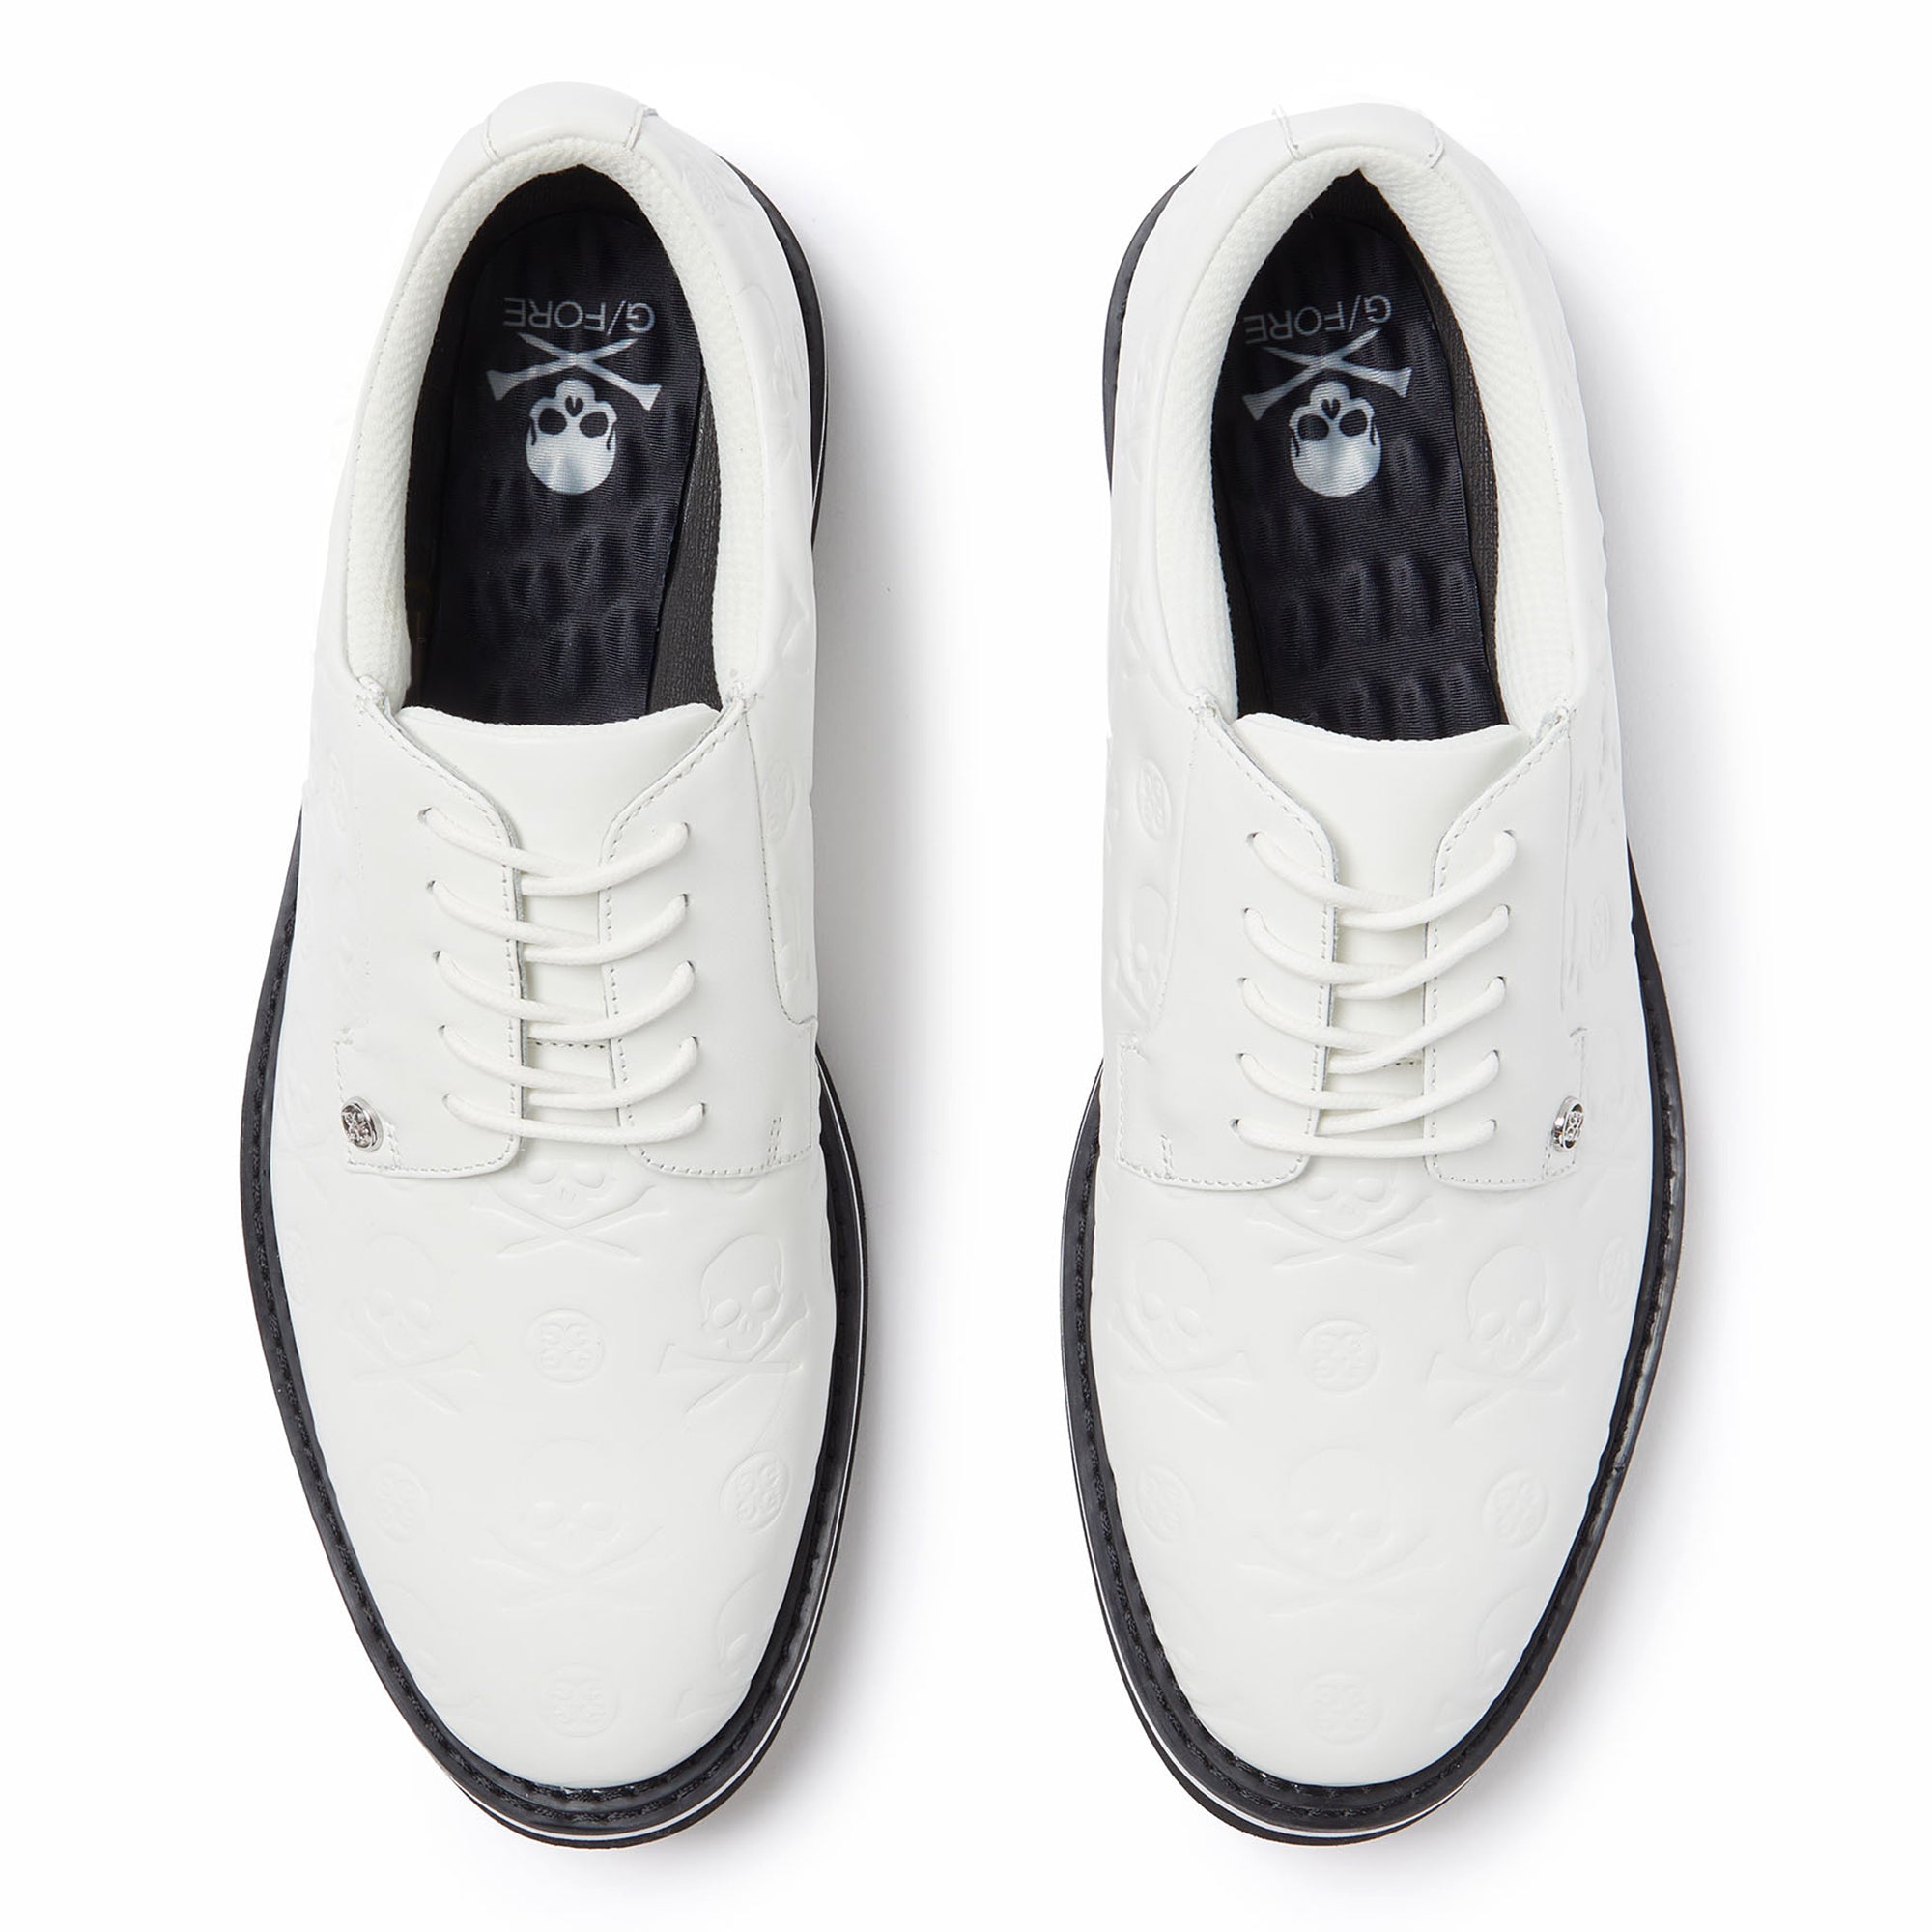 g-fore-gallivanter-debossed-leather-golf-shoes-gmf000001-snow-onyx-s-onyx